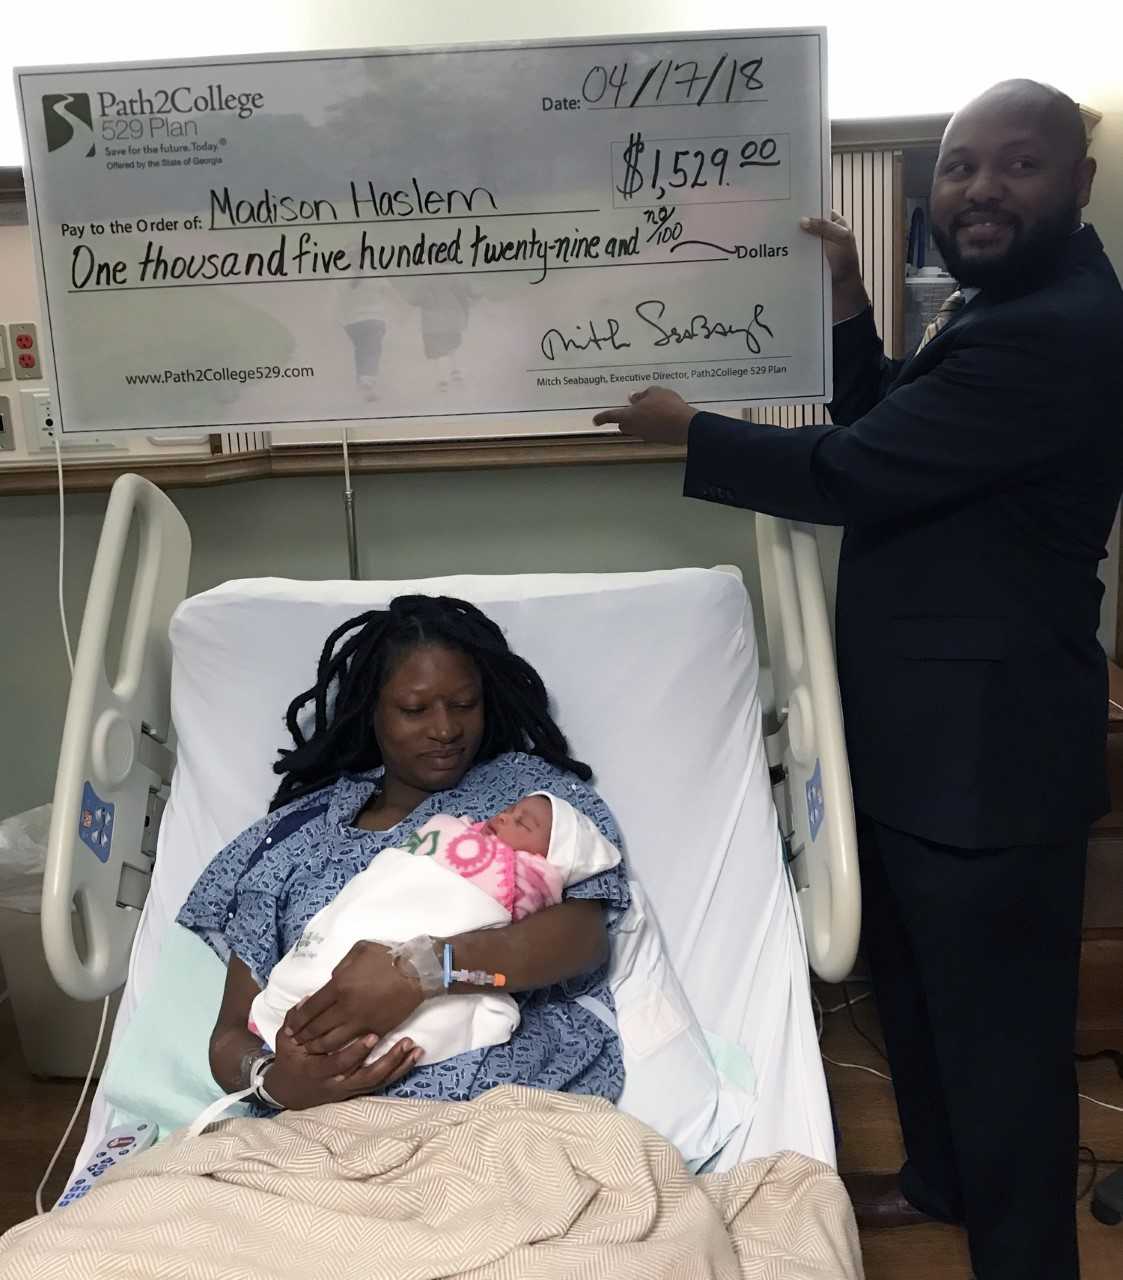 Family of first tax day baby poses with Path2College donation check